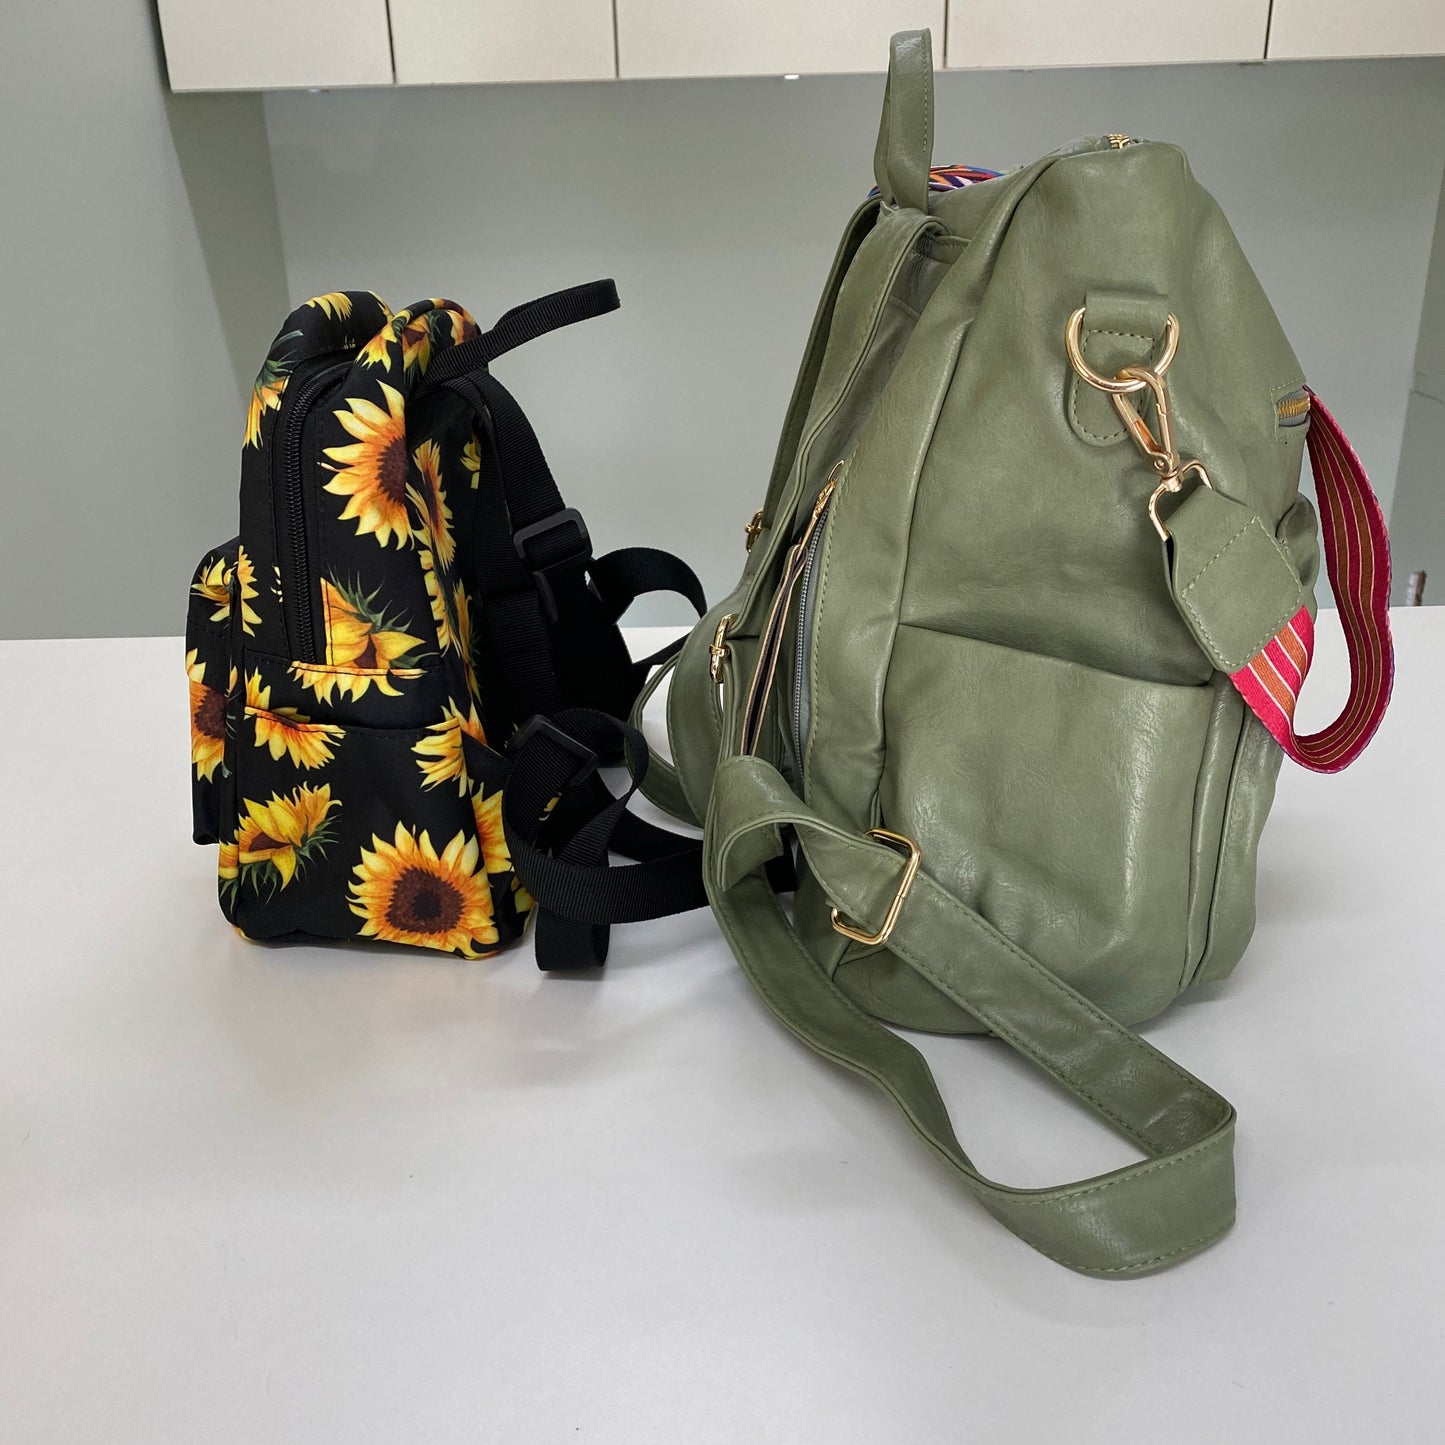 Pouch & Mini Backpack Set - Sunflower Cow Wood